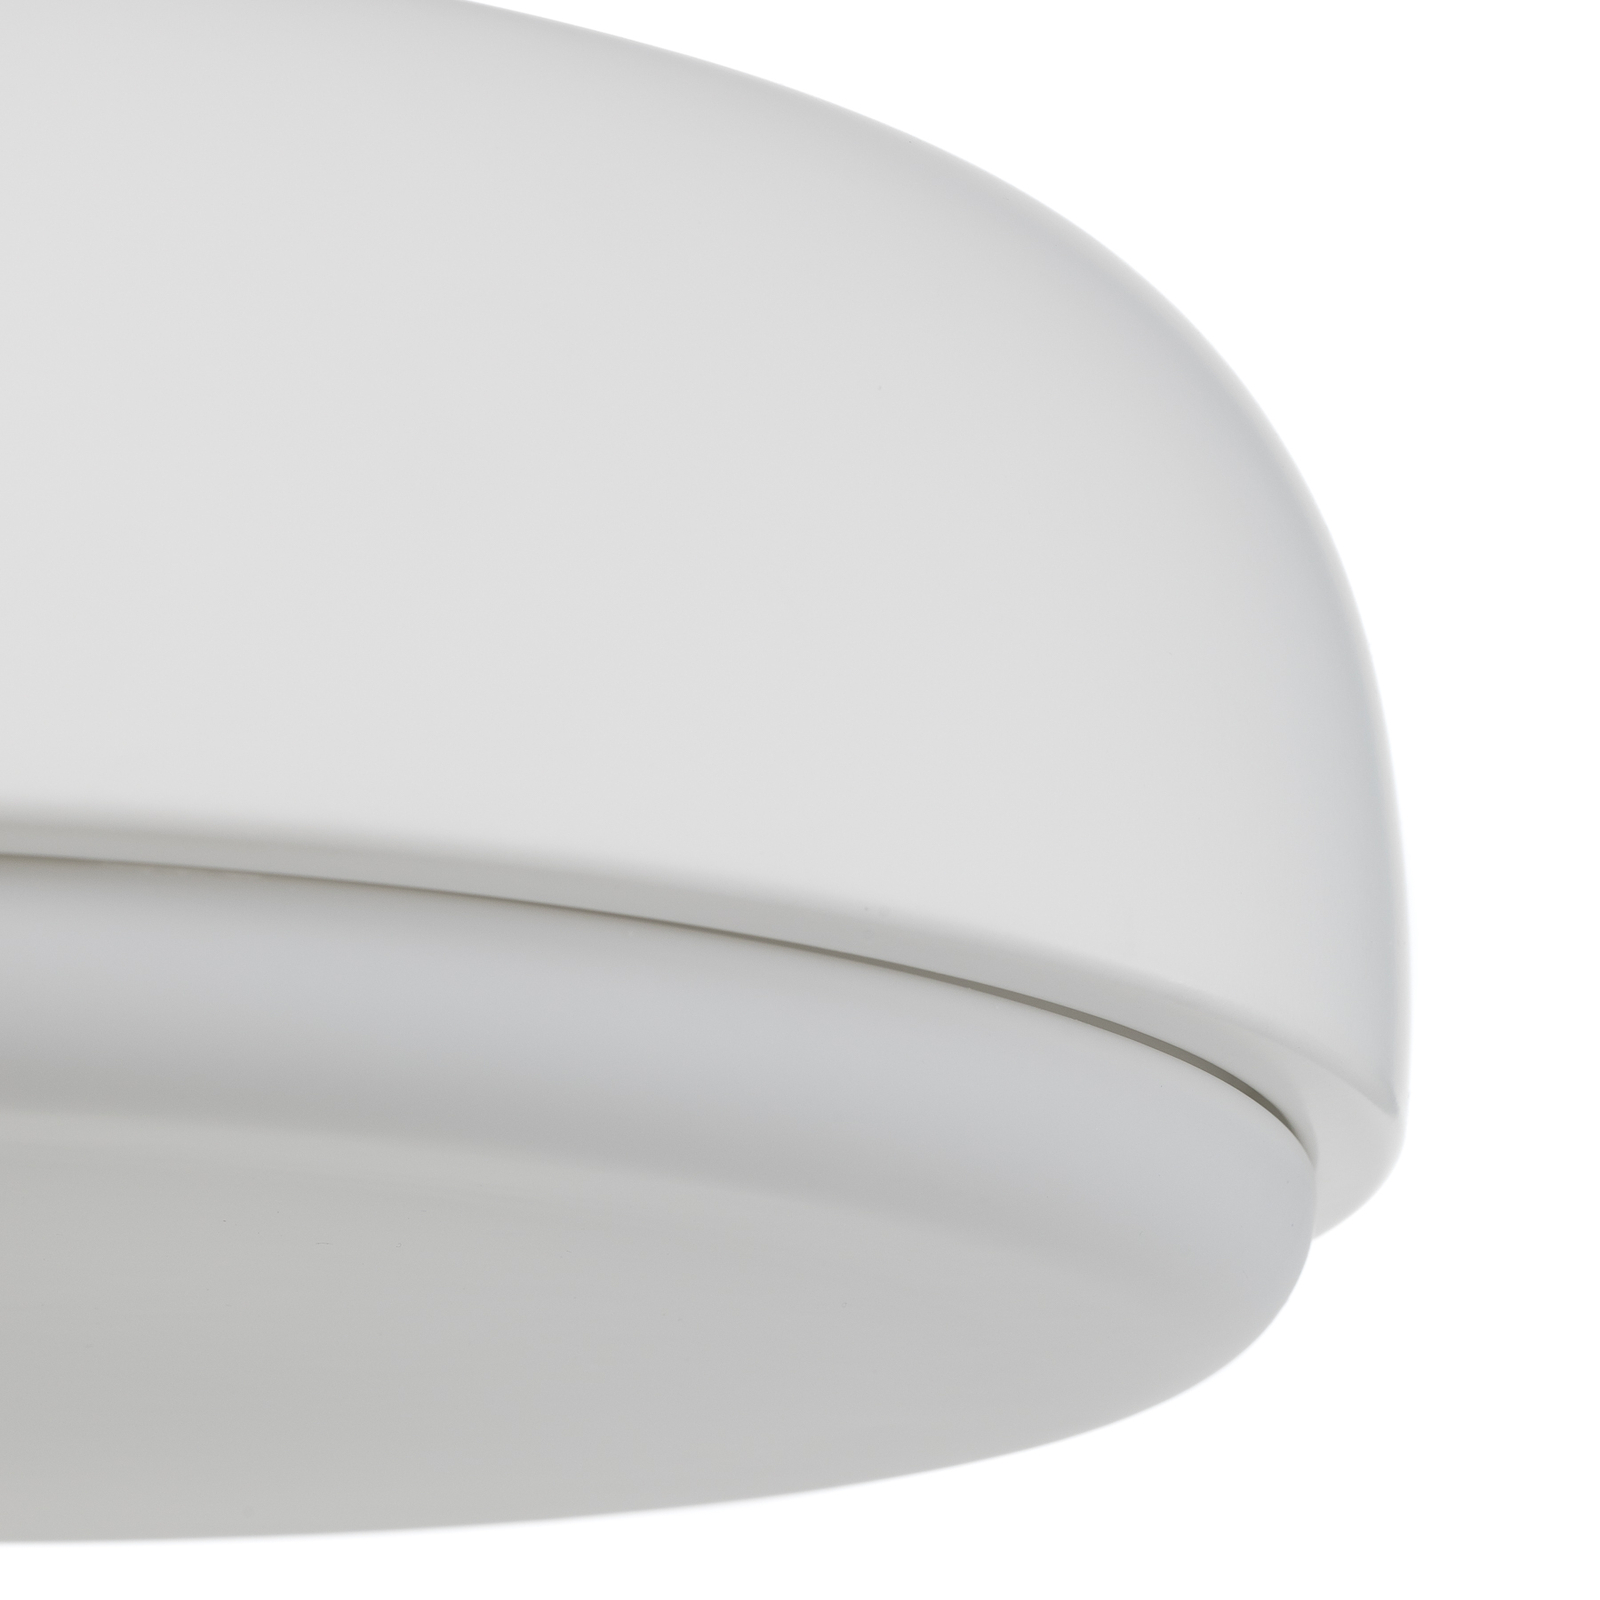 Northern Over Me ceiling light white 40 cm